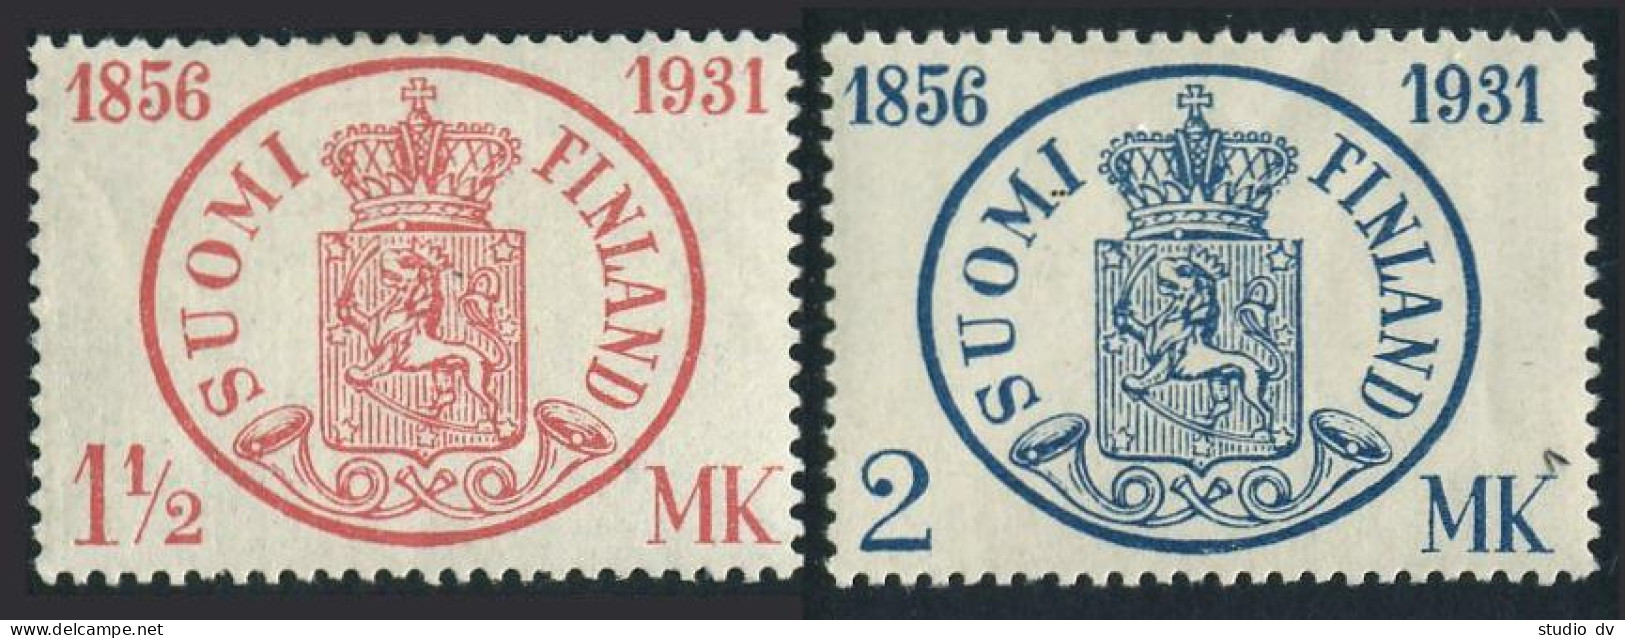 Finland 182-183,hinged. Mi 167-168. 1st Use Of Postage Stamps In Finland,75,1931 - Unused Stamps